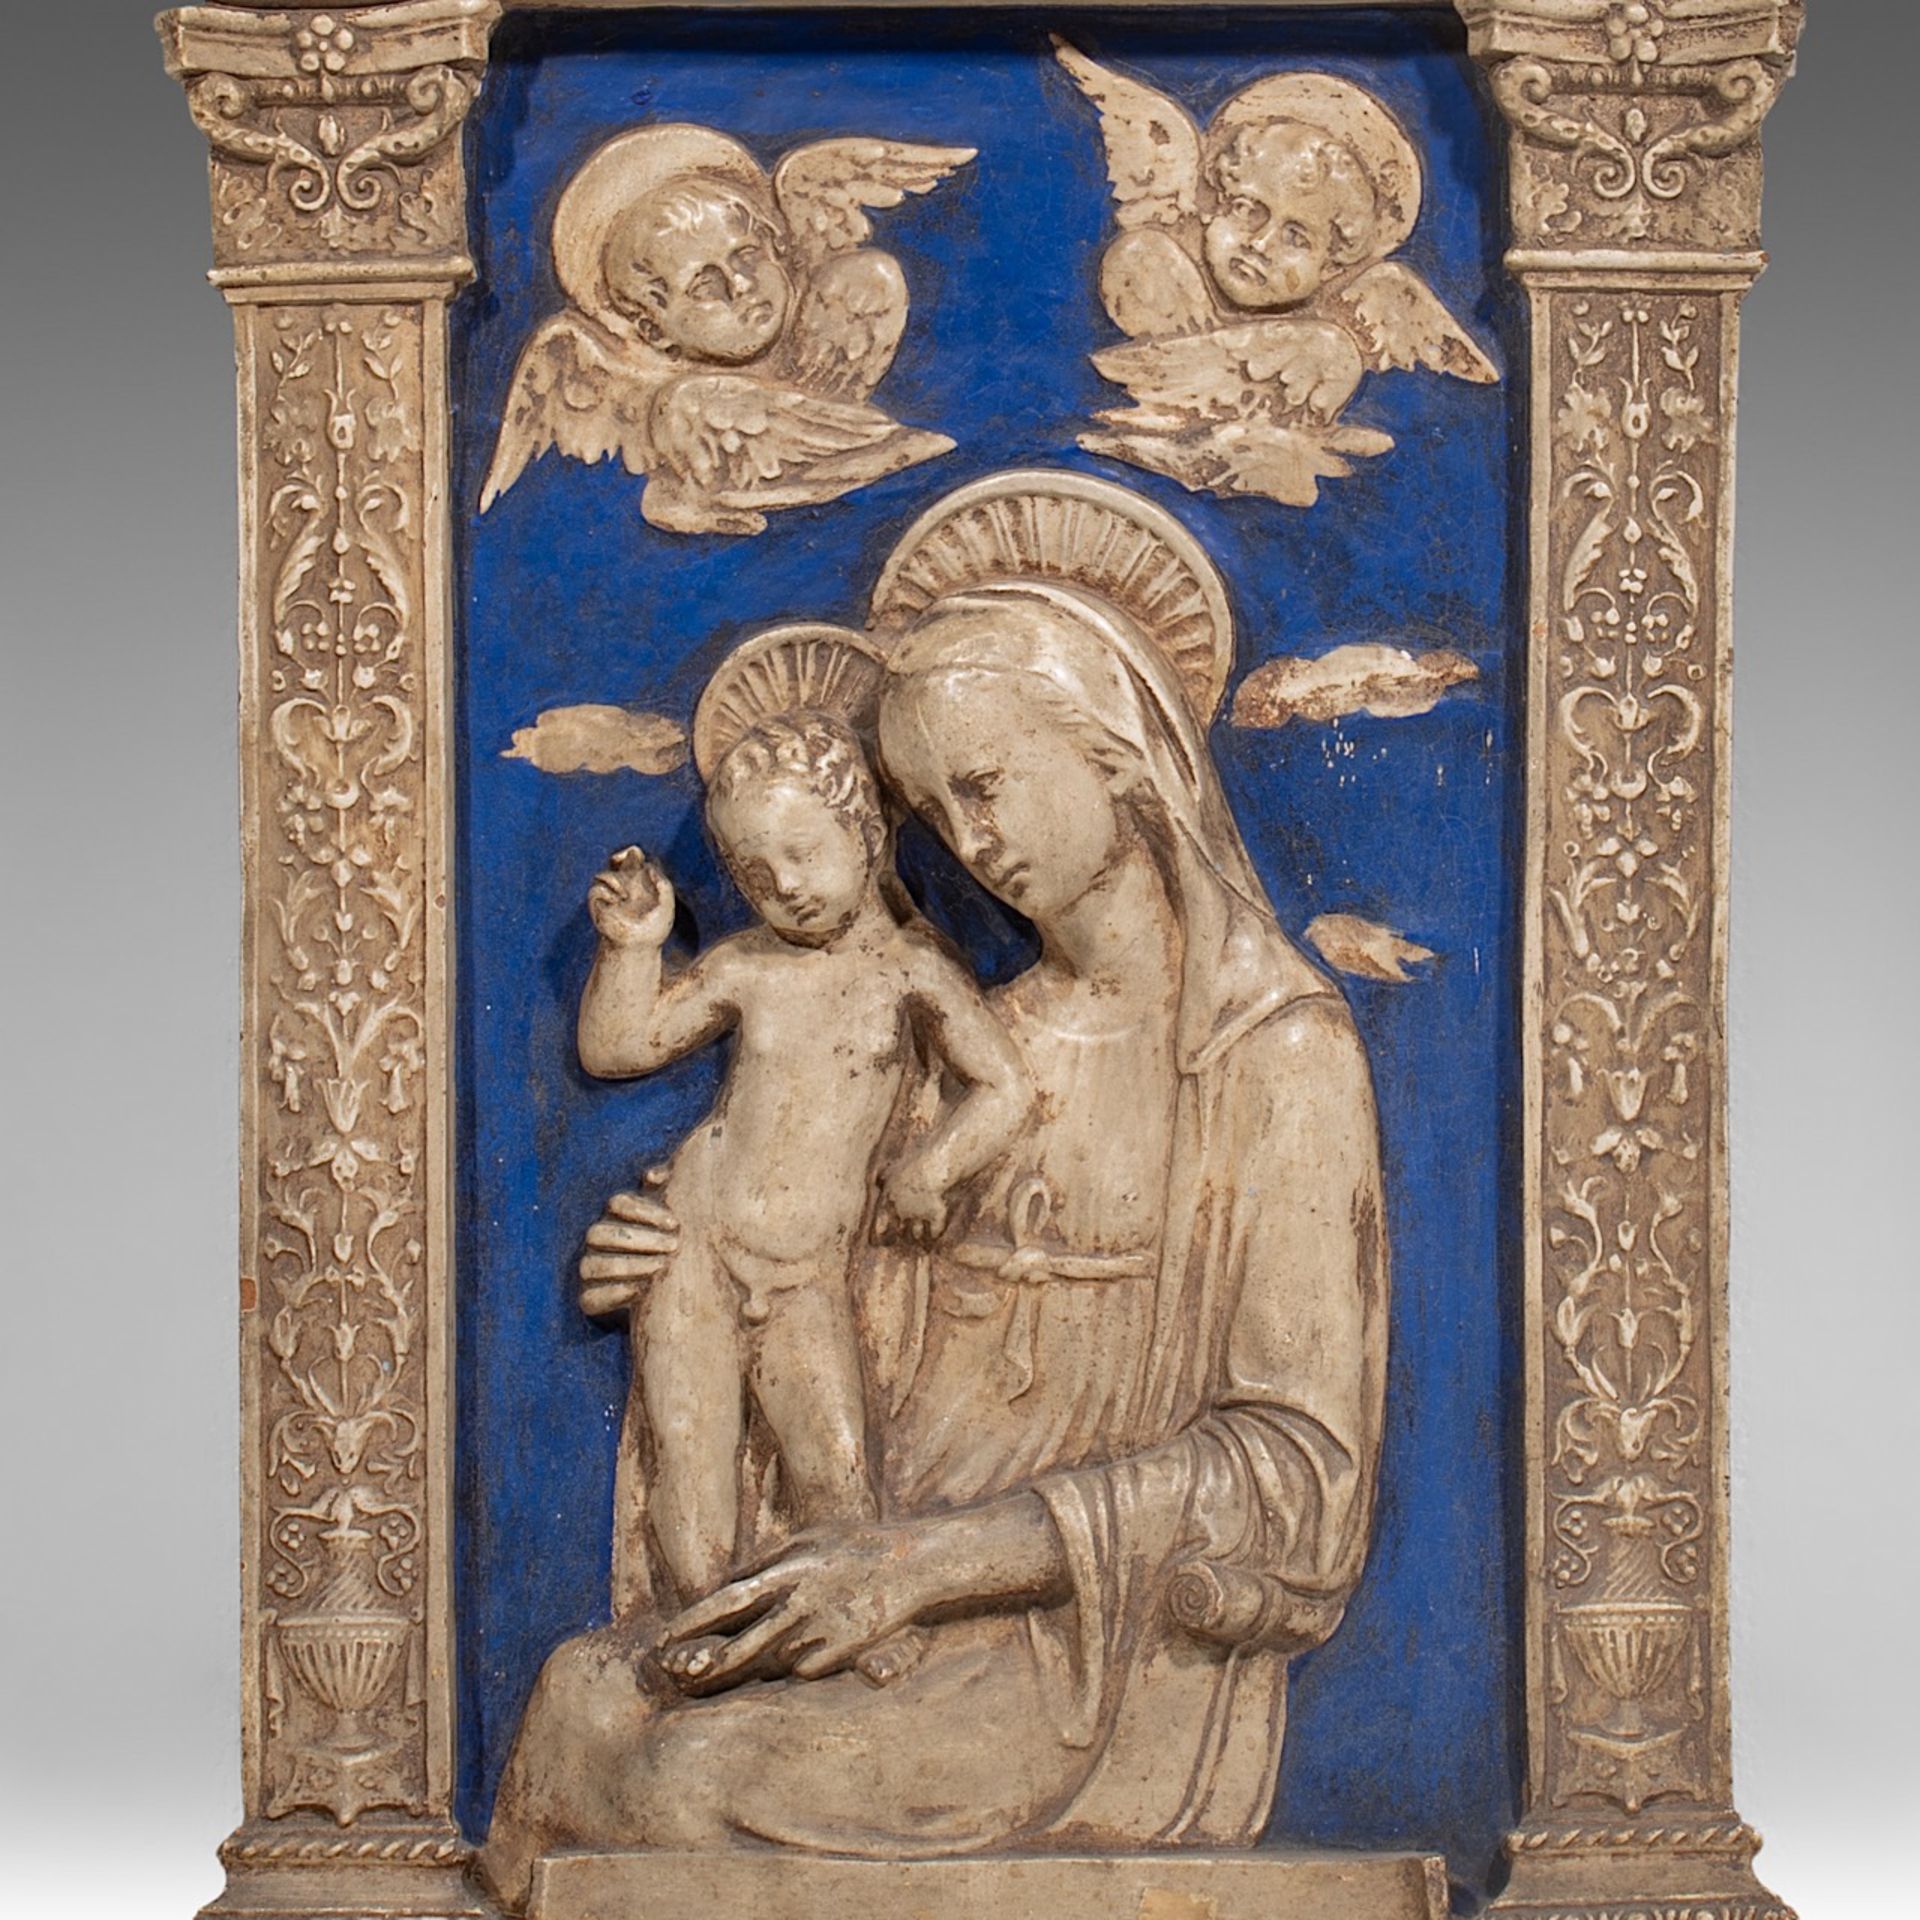 A blue and white glazed terracotta relief of the Virgin and Child in the Della Robbia manner or a fo - Image 5 of 6